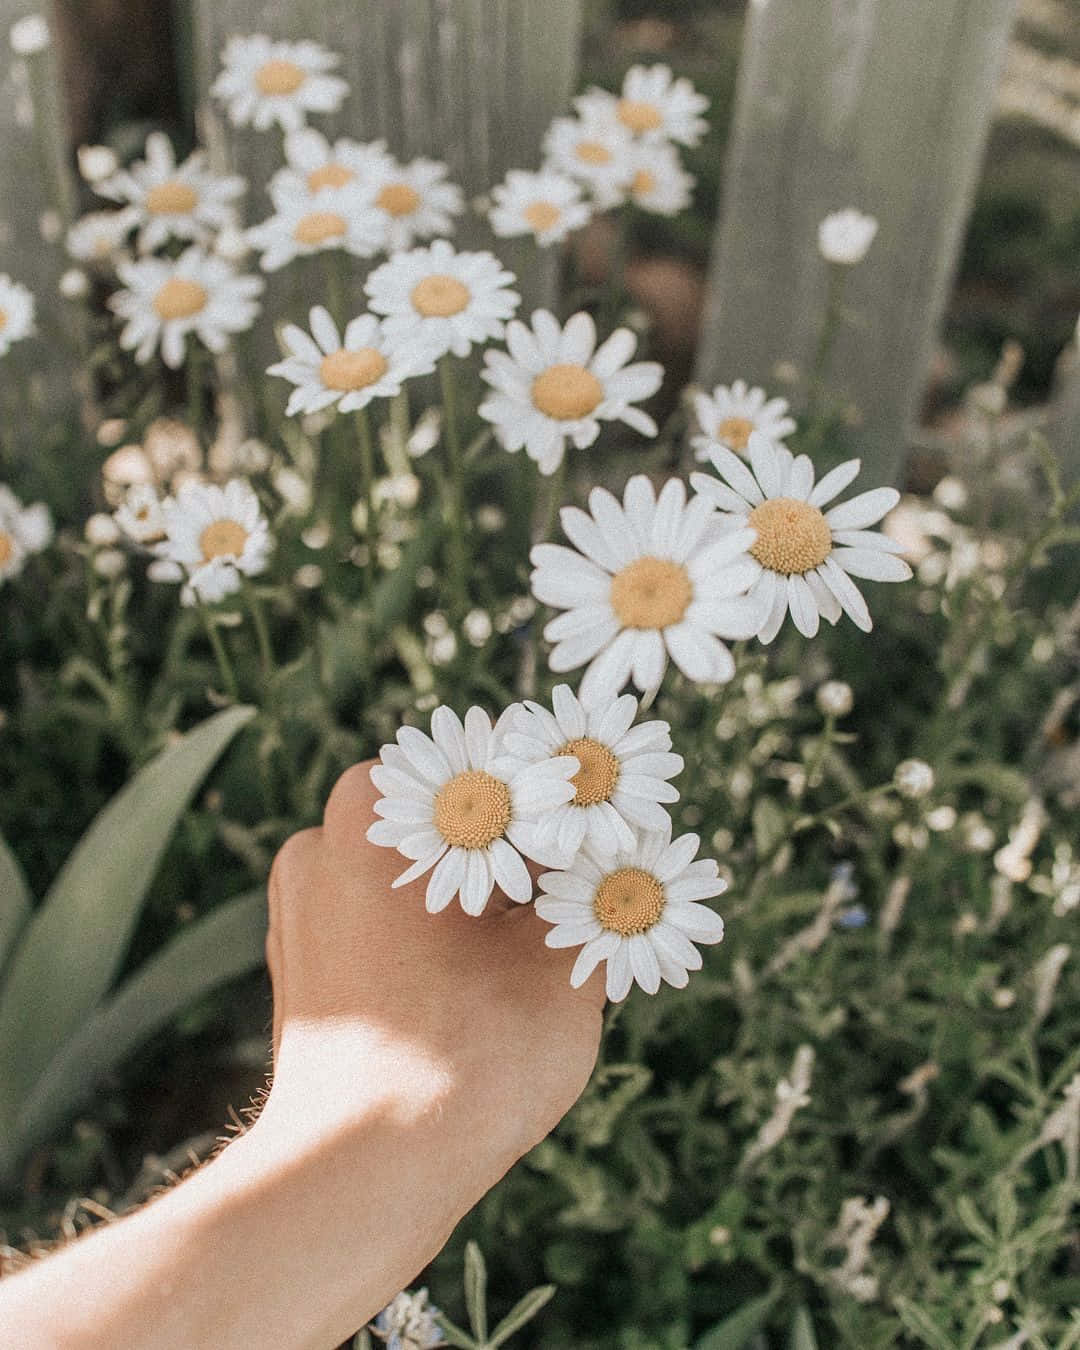 A Person's Hand Holding Daisies In A Garden